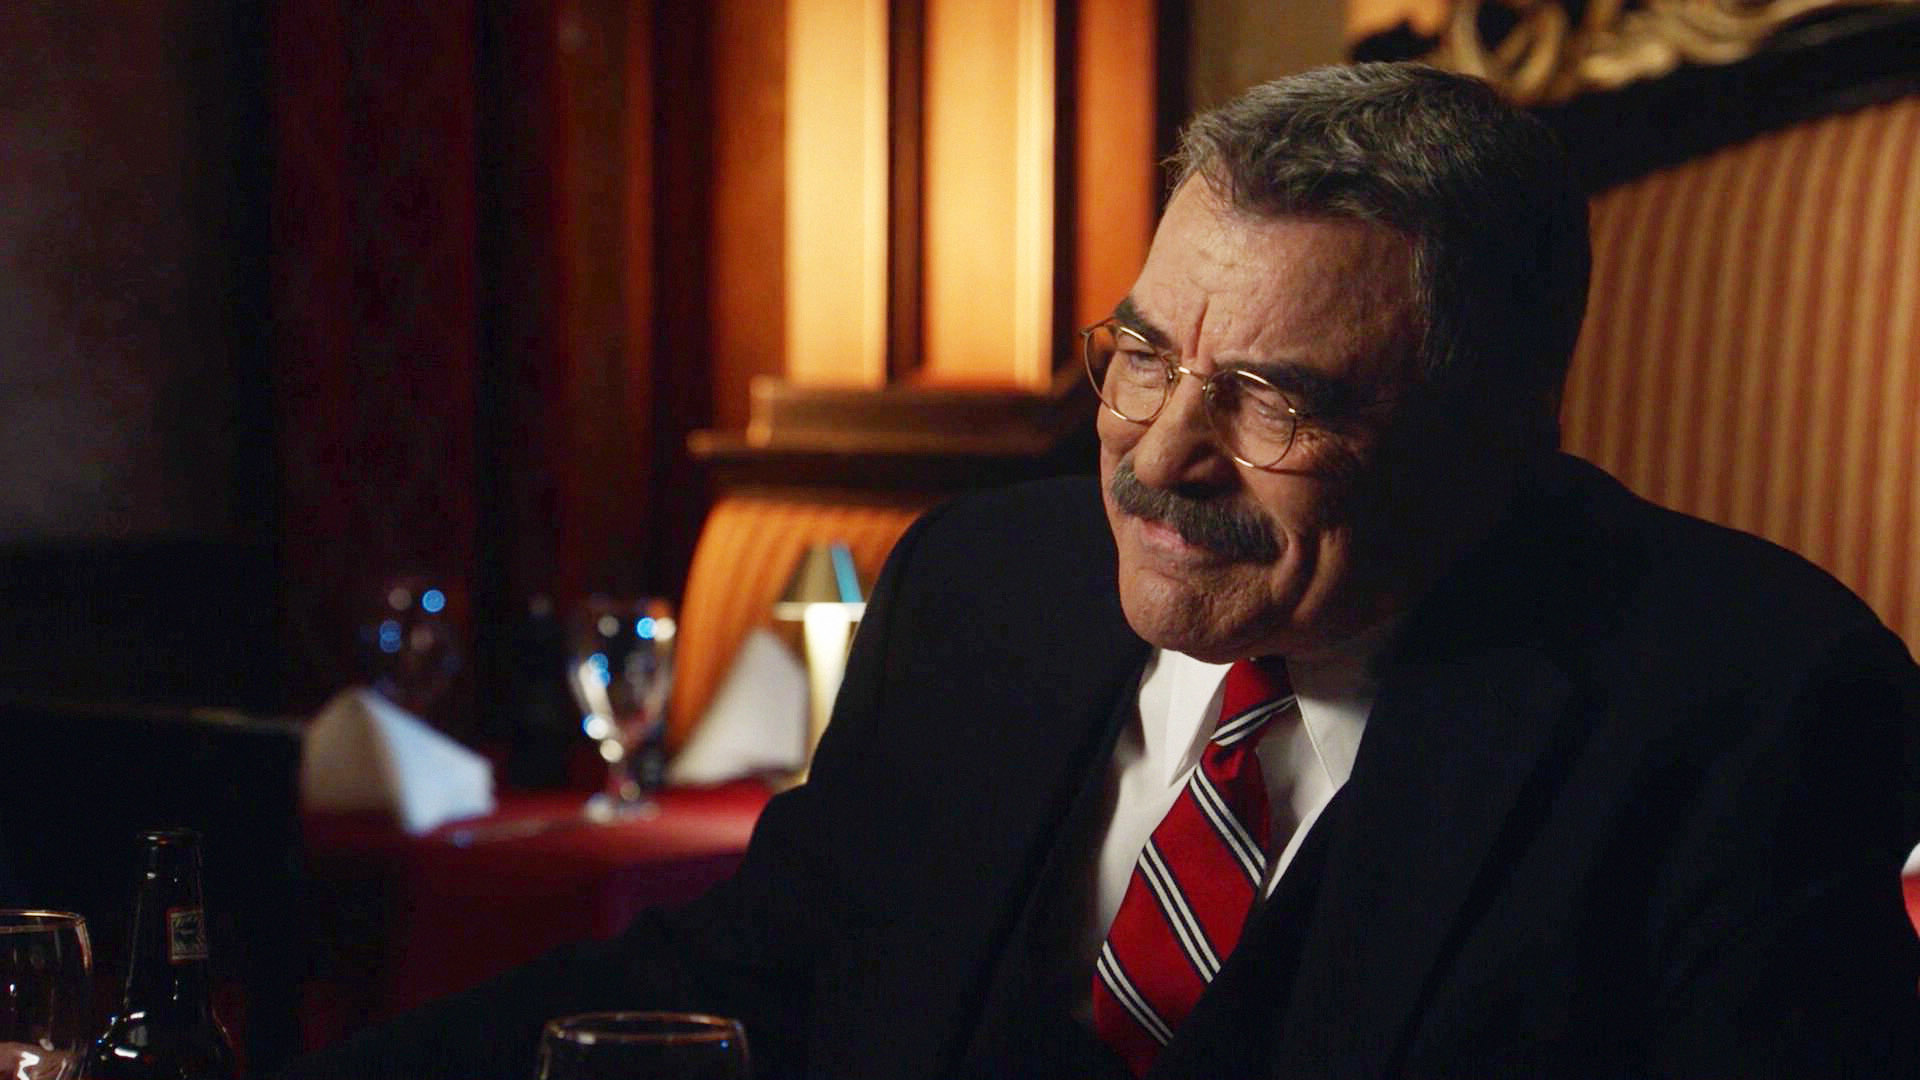 The 10 Best Blue Bloods Guest Stars, Ranked by How Famous They Are